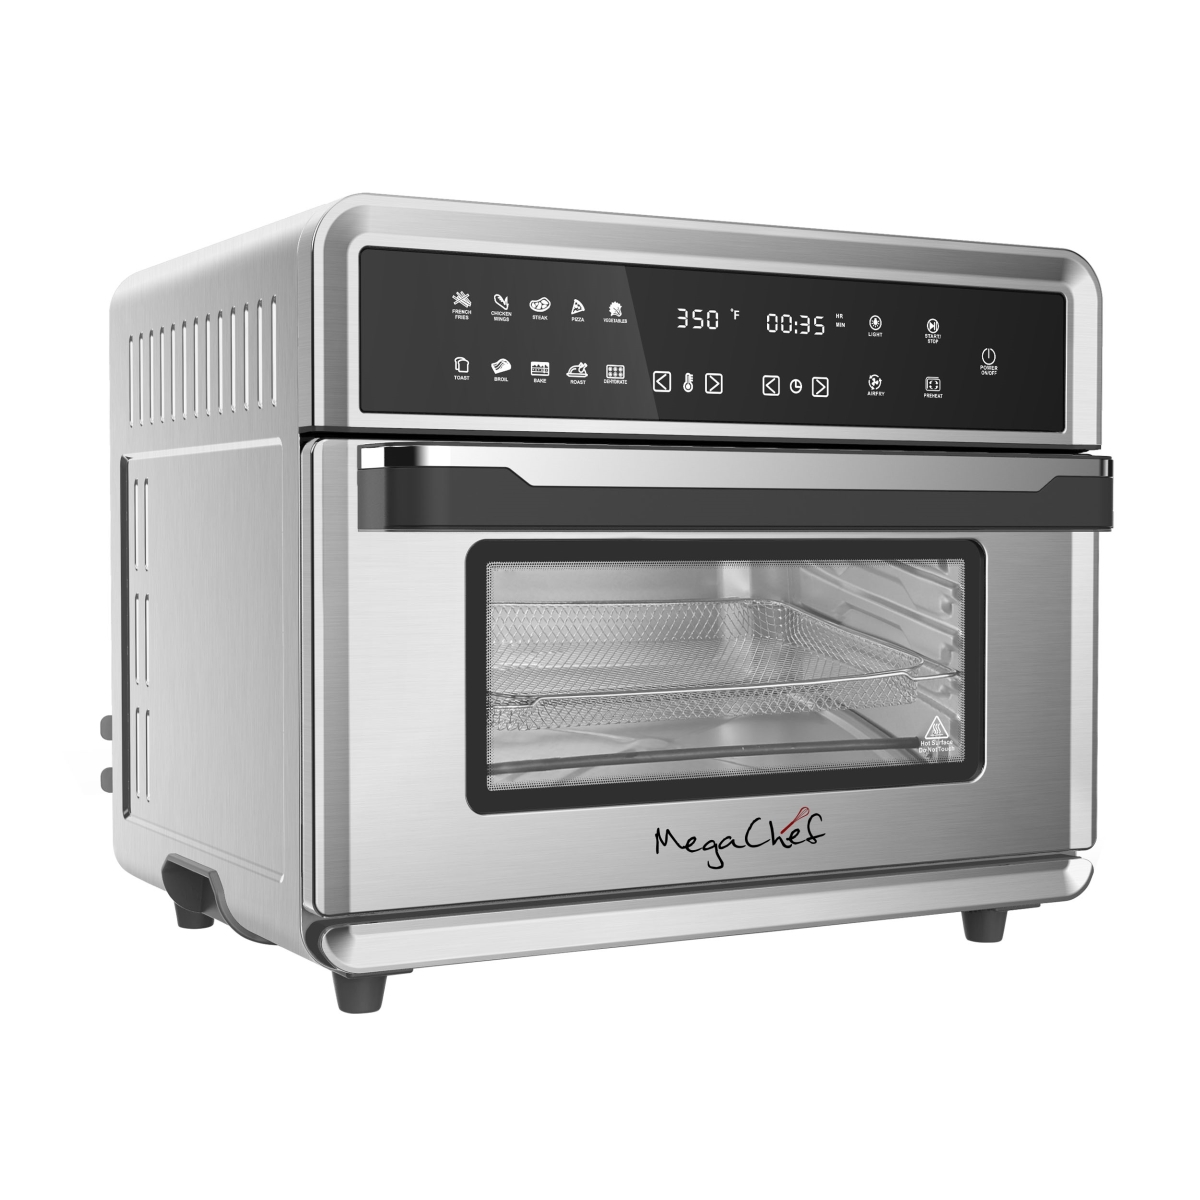 Picture of MegaChef MCOV-2050 10 in. 360 deg 1 Electronic Multifunction Hot Air Technology Countertop Oven